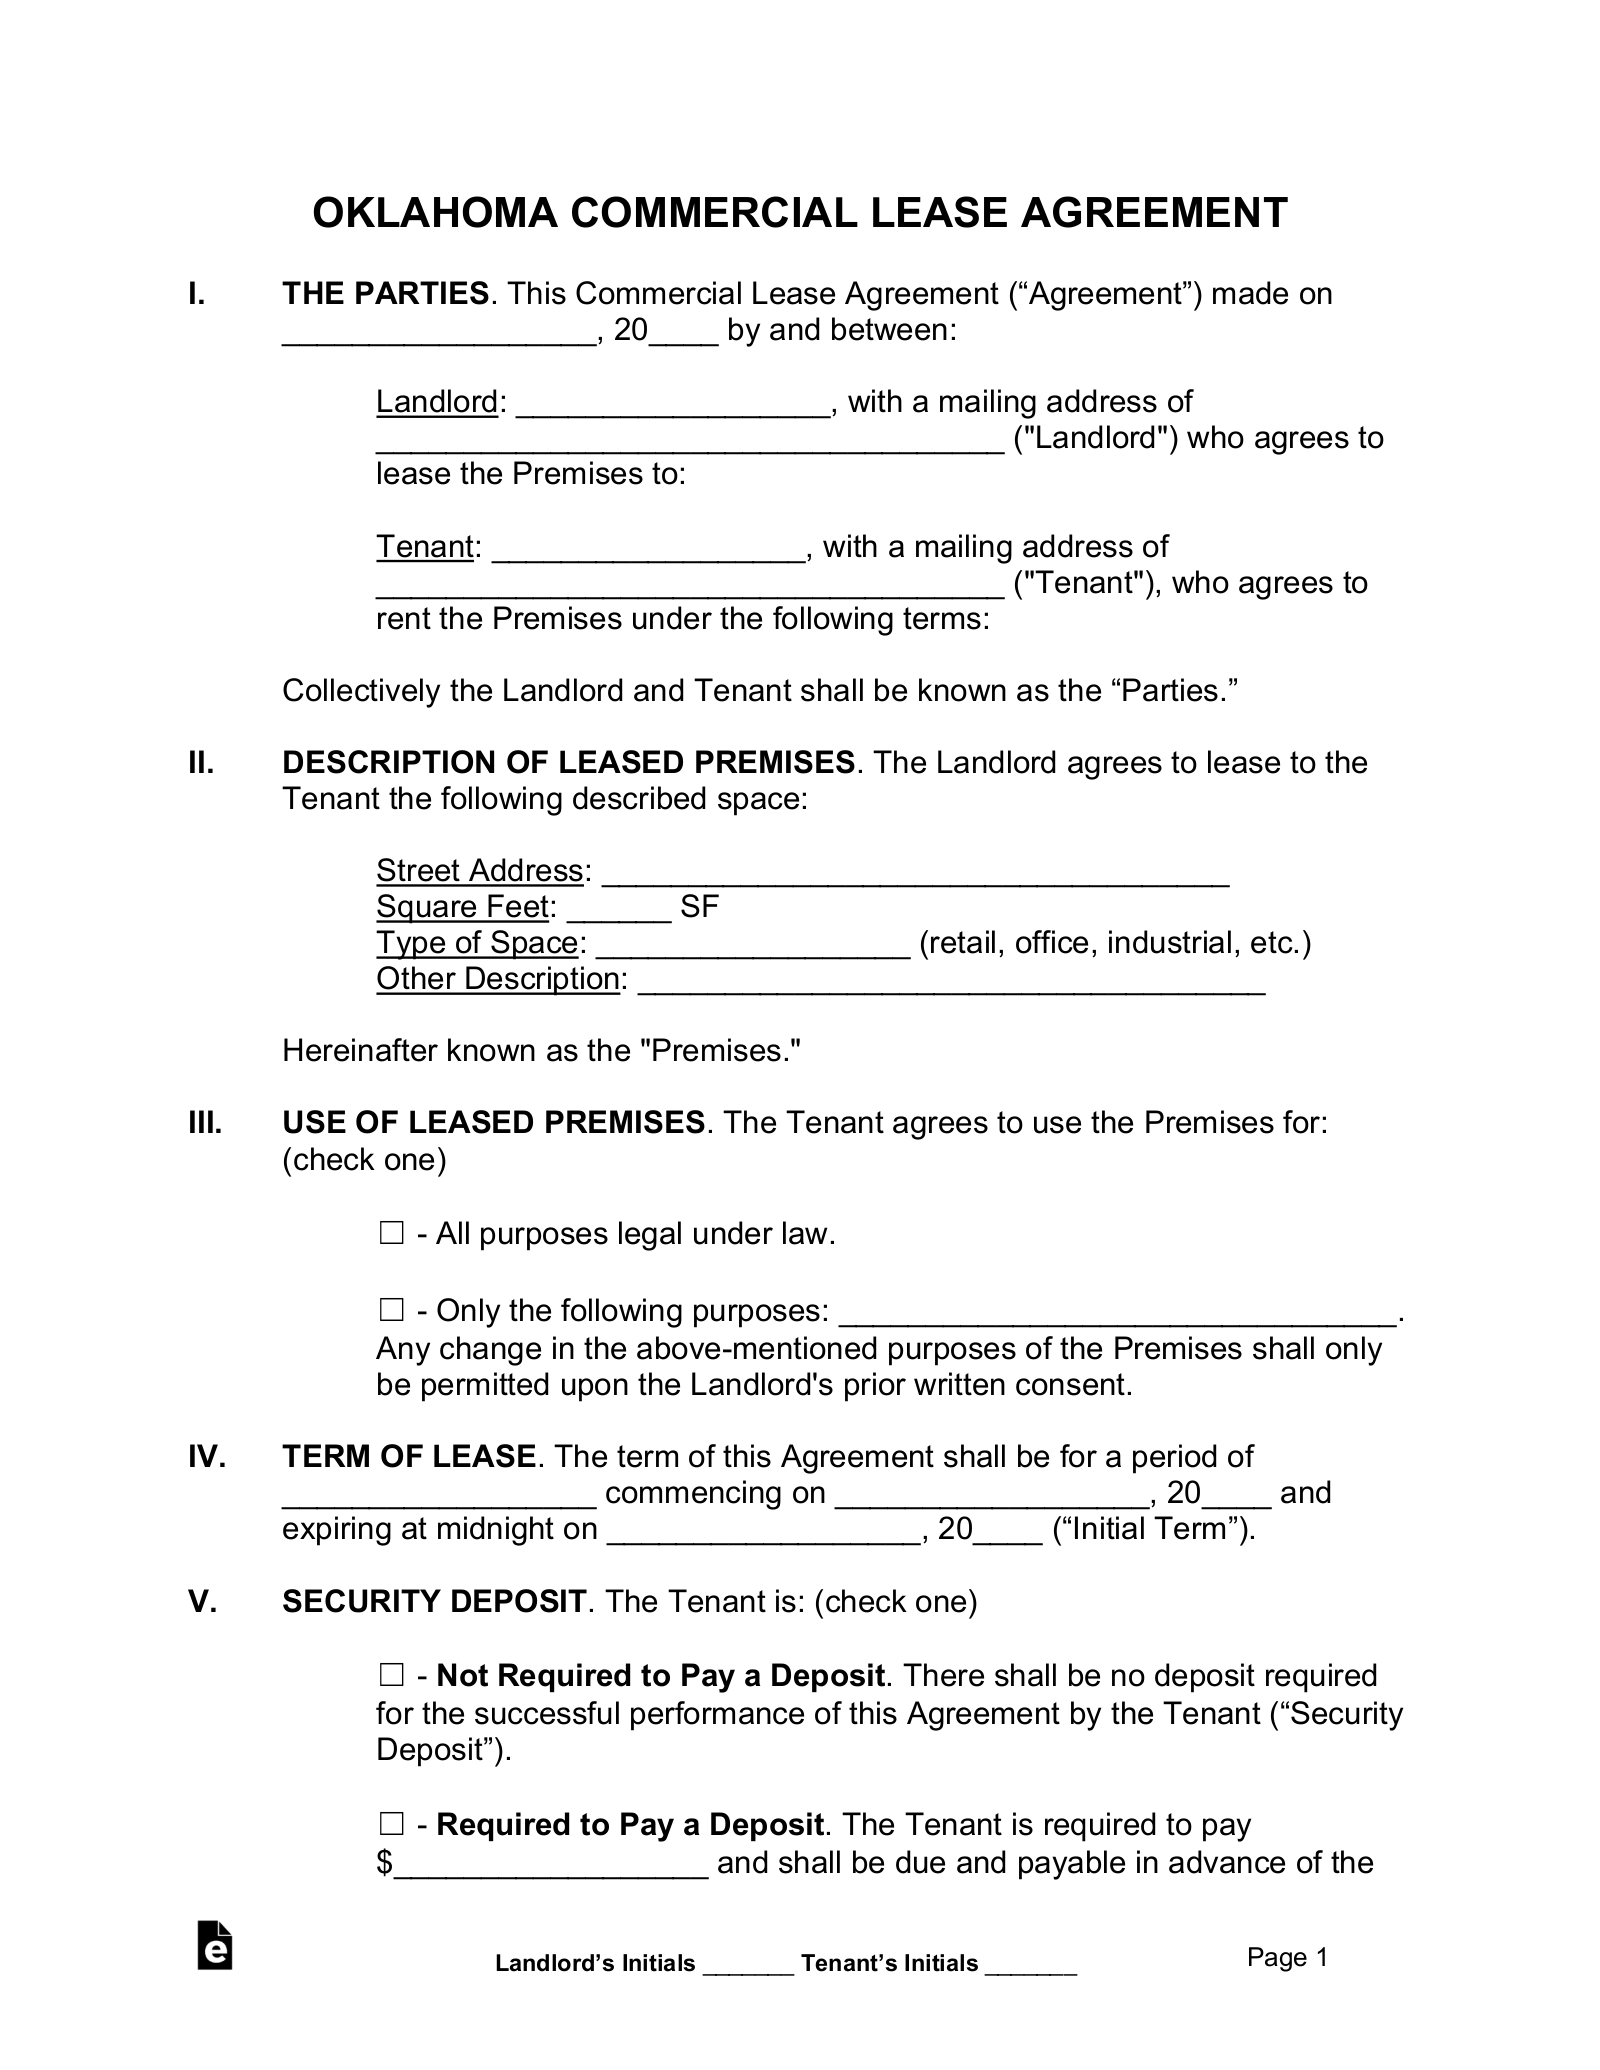 Oklahoma Commercial Lease Agreement Form